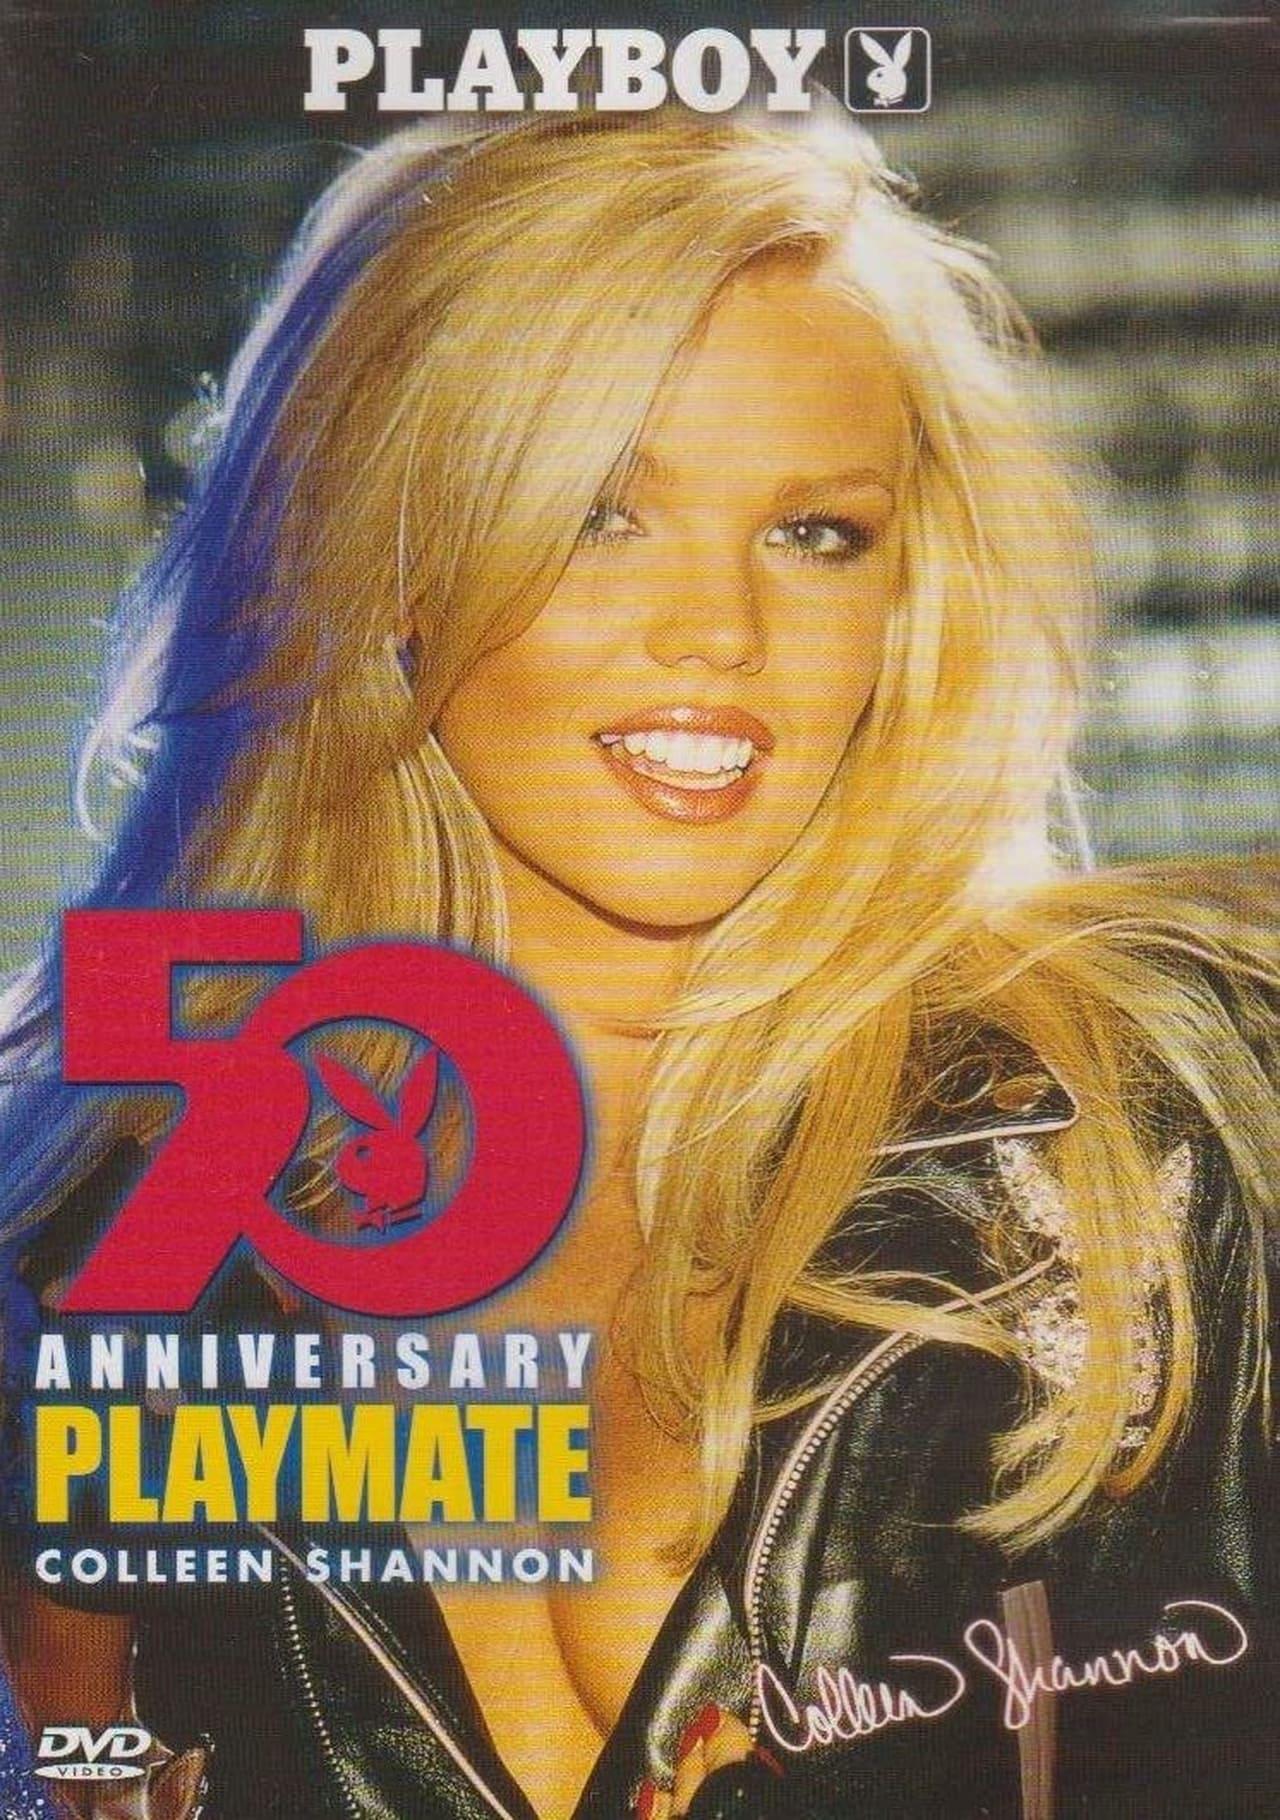 Playboy Video Centerfold: Colleen Shannon - 50th Anniversary Playmate poster